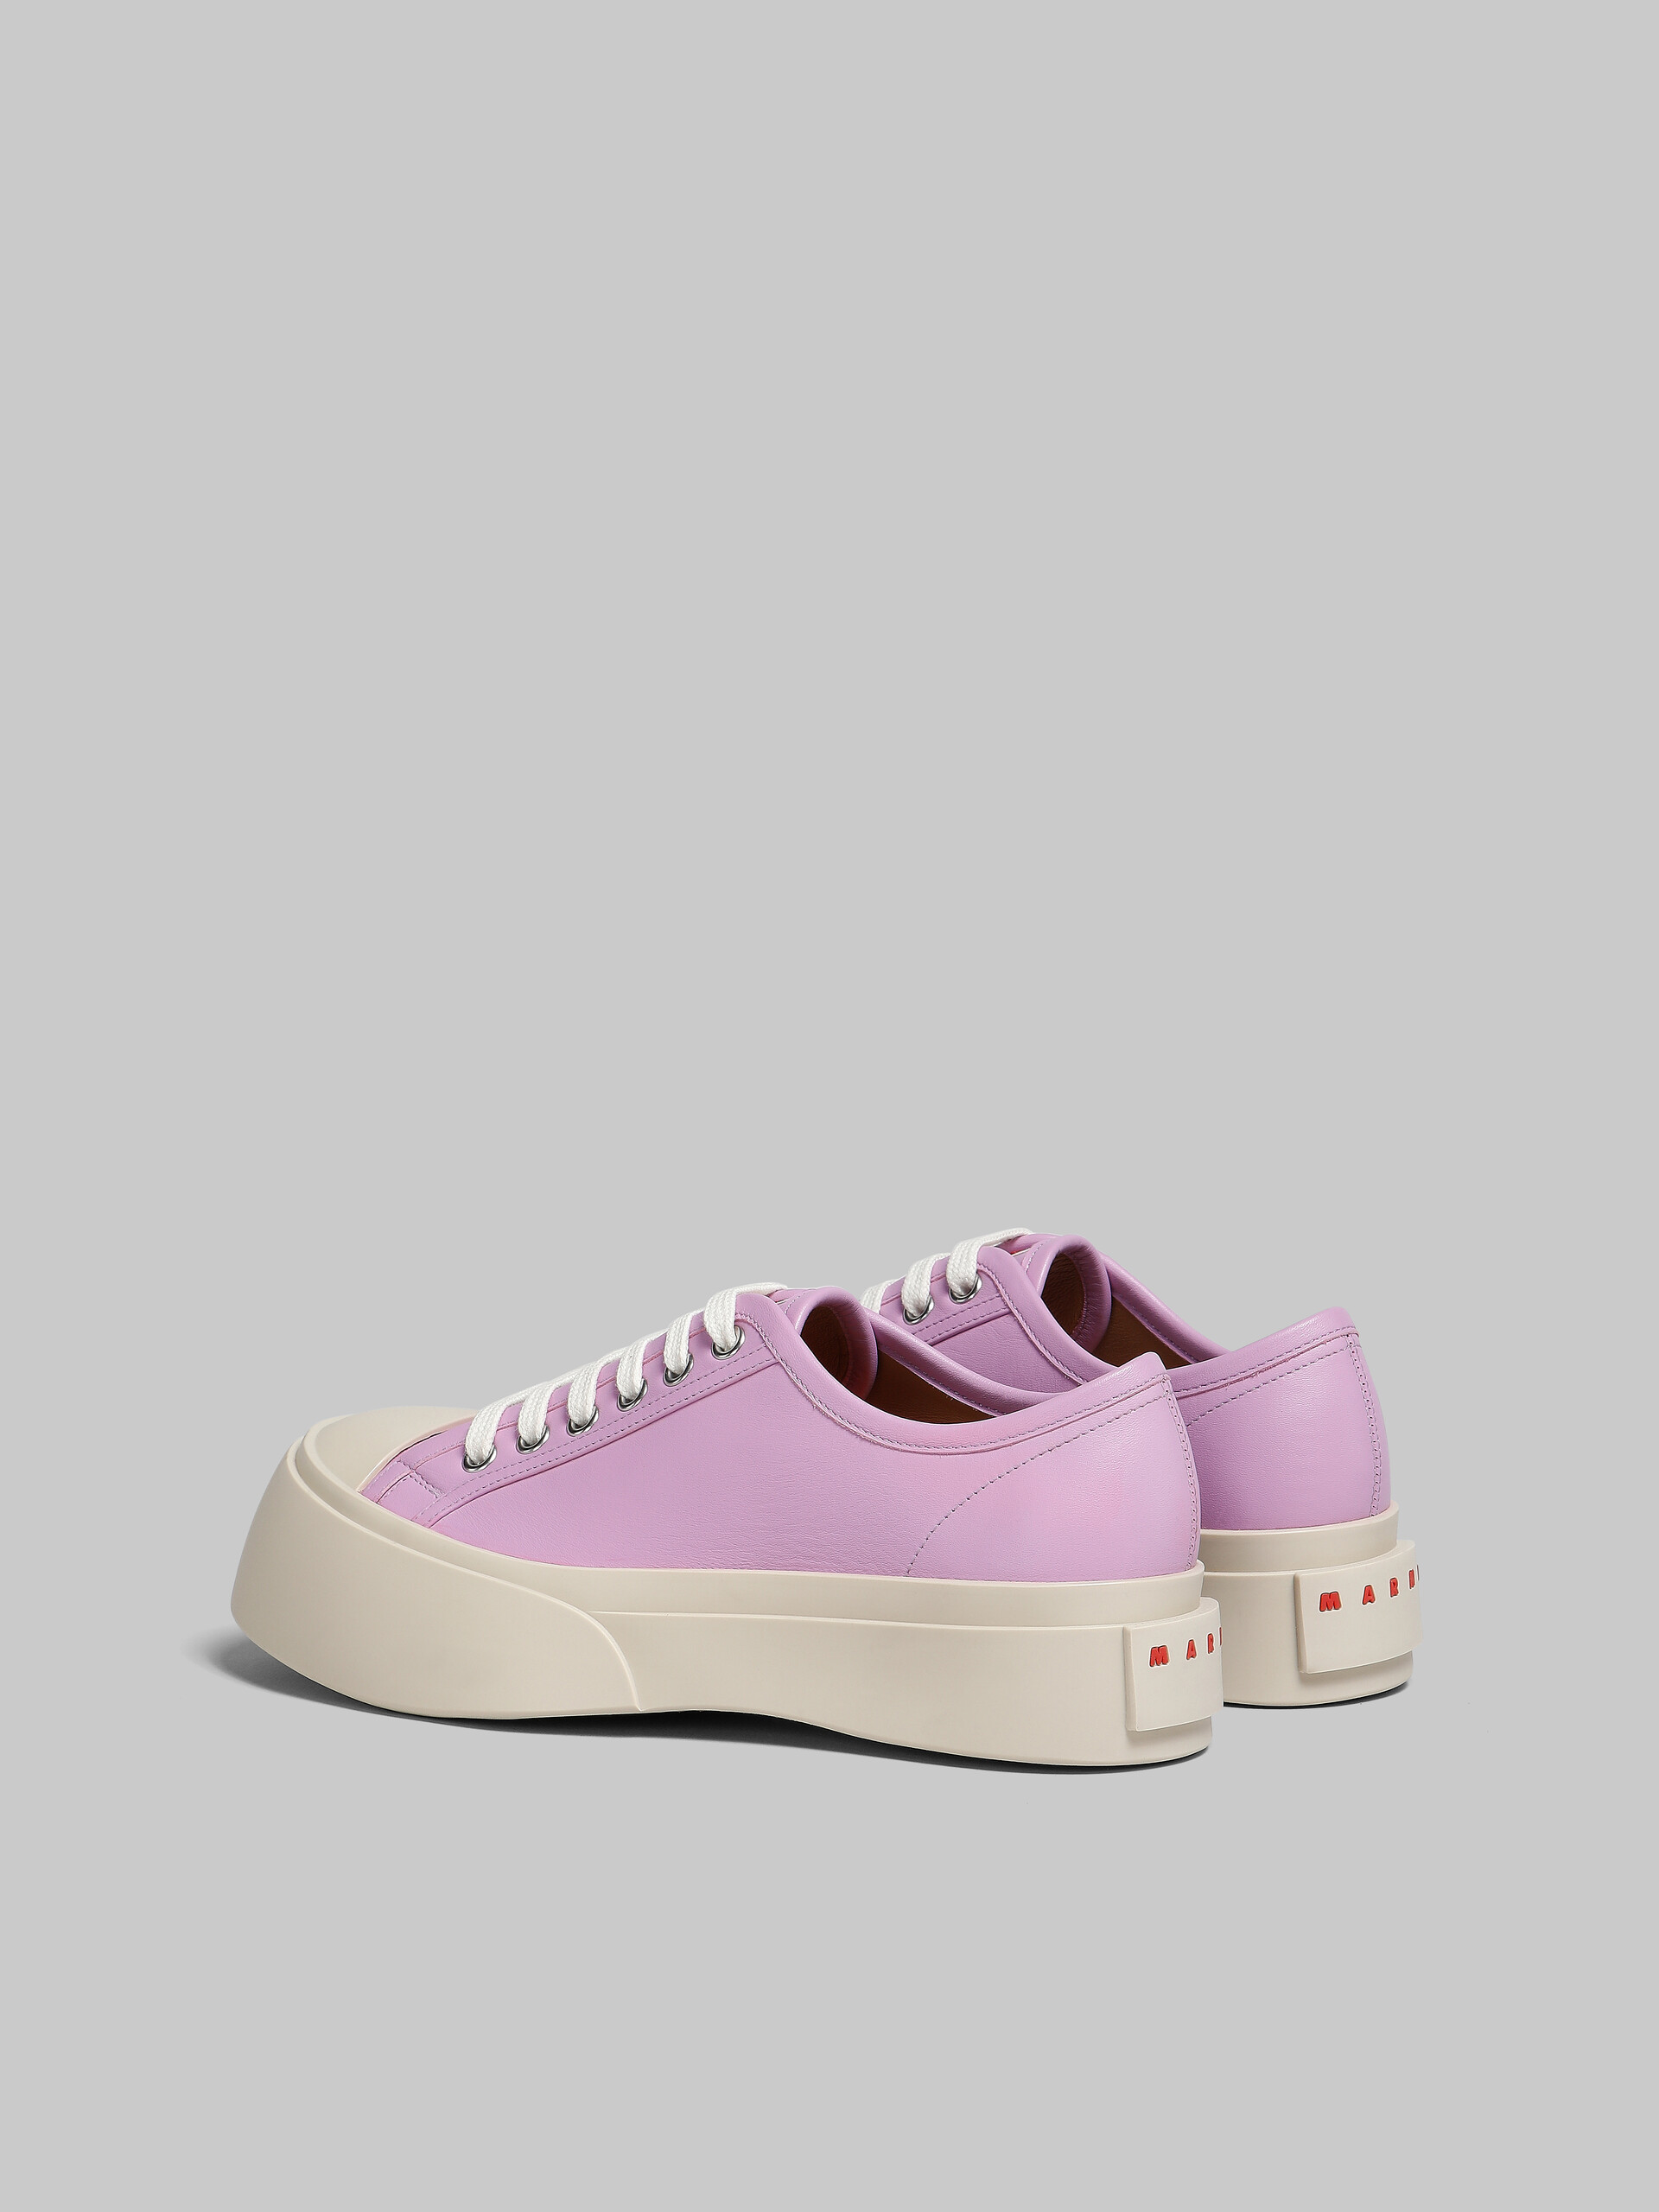 Lilac nappa leather Pablo lace-up sneaker - Sneakers - Image 3